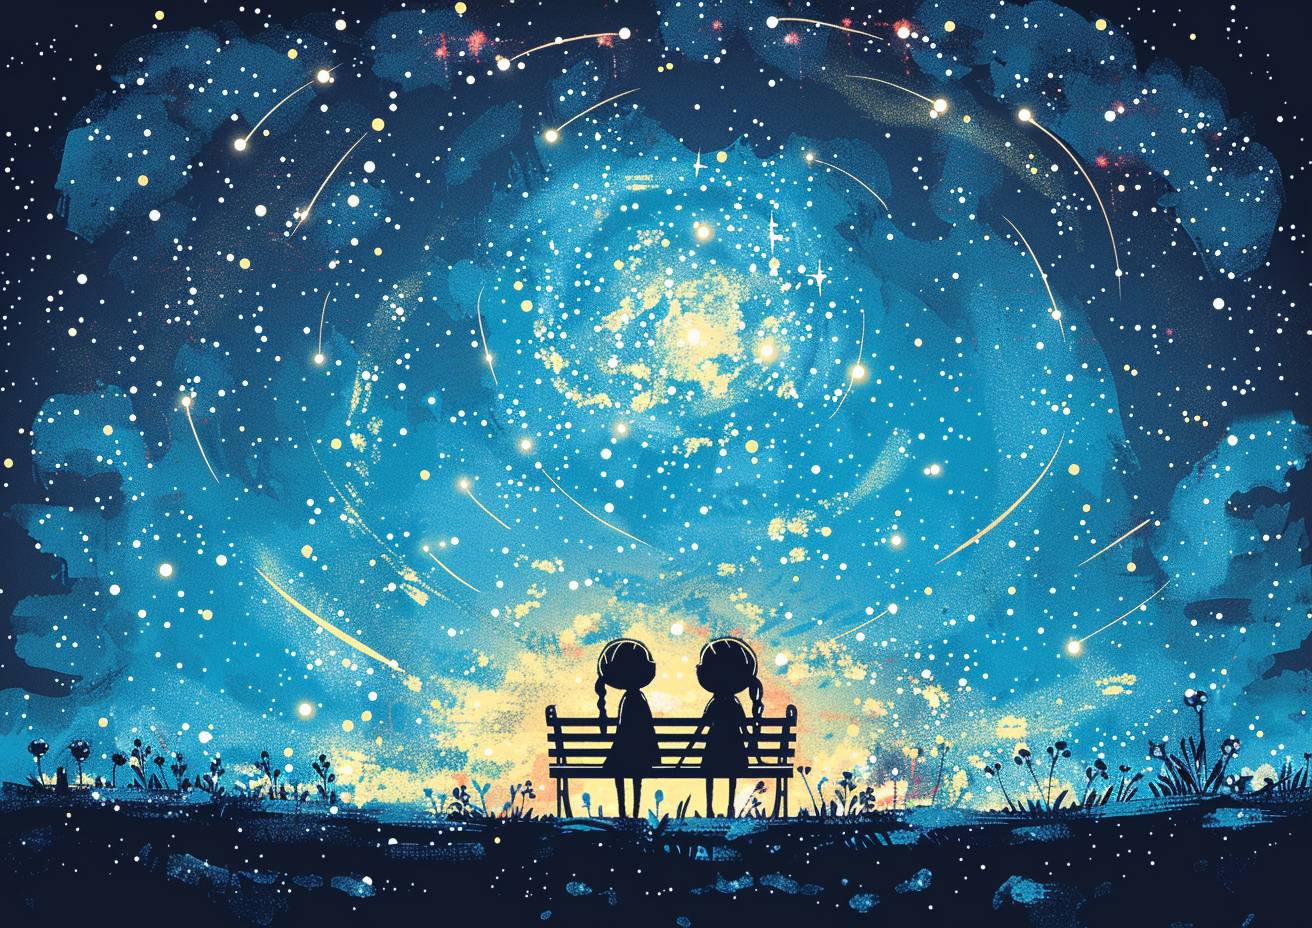 A couple silhouetted, sitting on a park bench, night sky, Milky Way, shooting stars with comet tails, tenebrism, jagged black border, strong visual flow